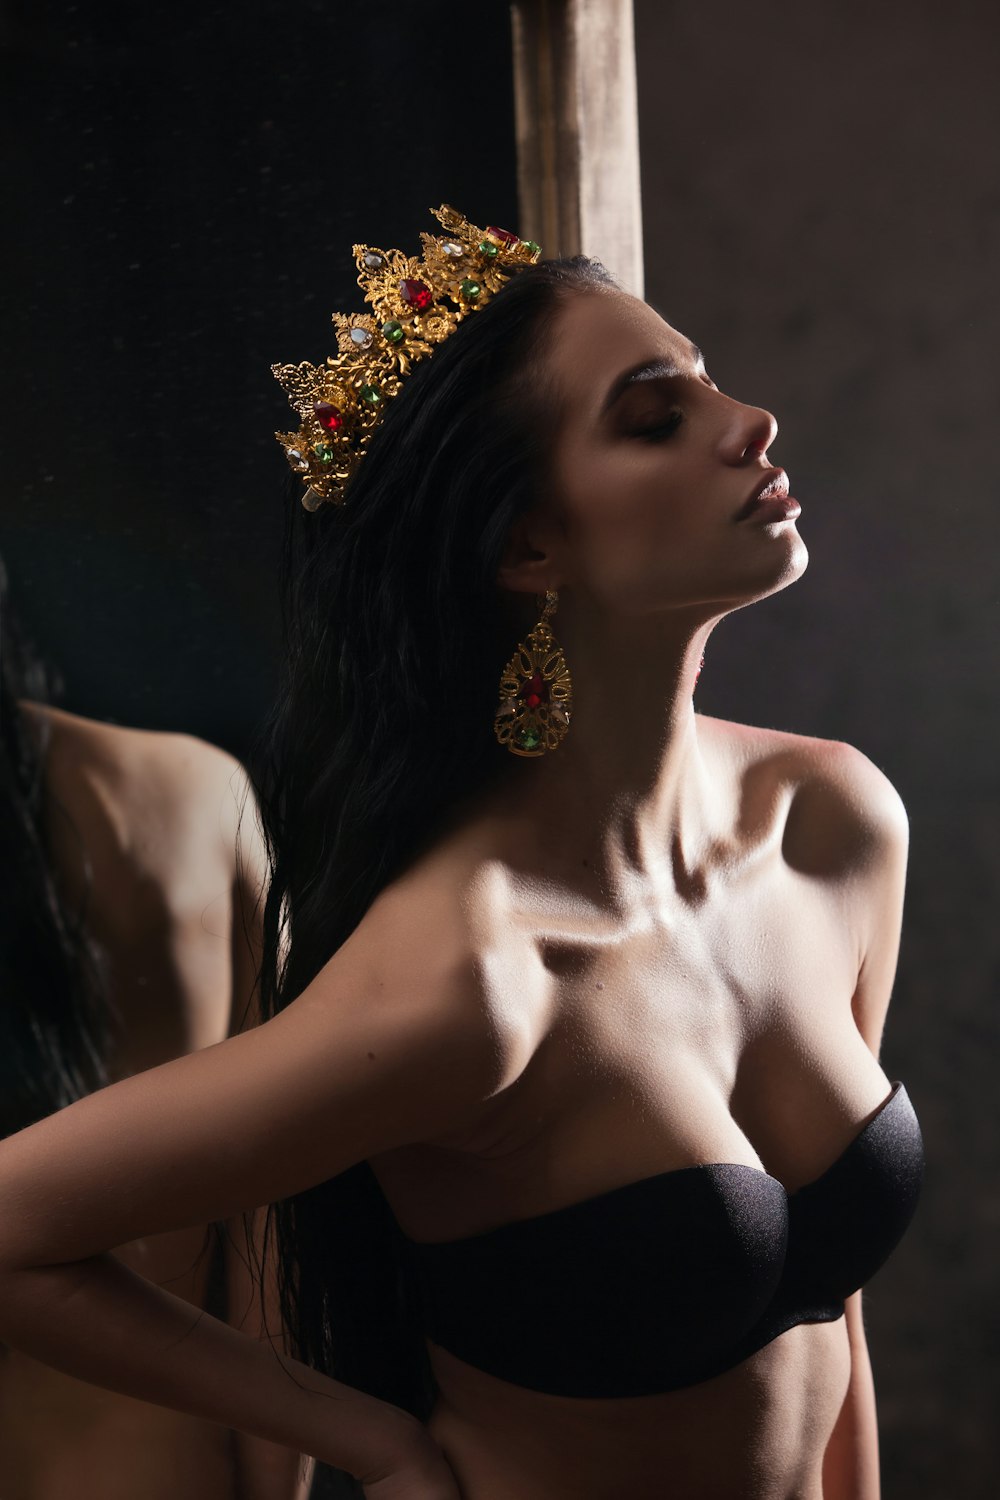 woman in black brassiere and gold-colored crown